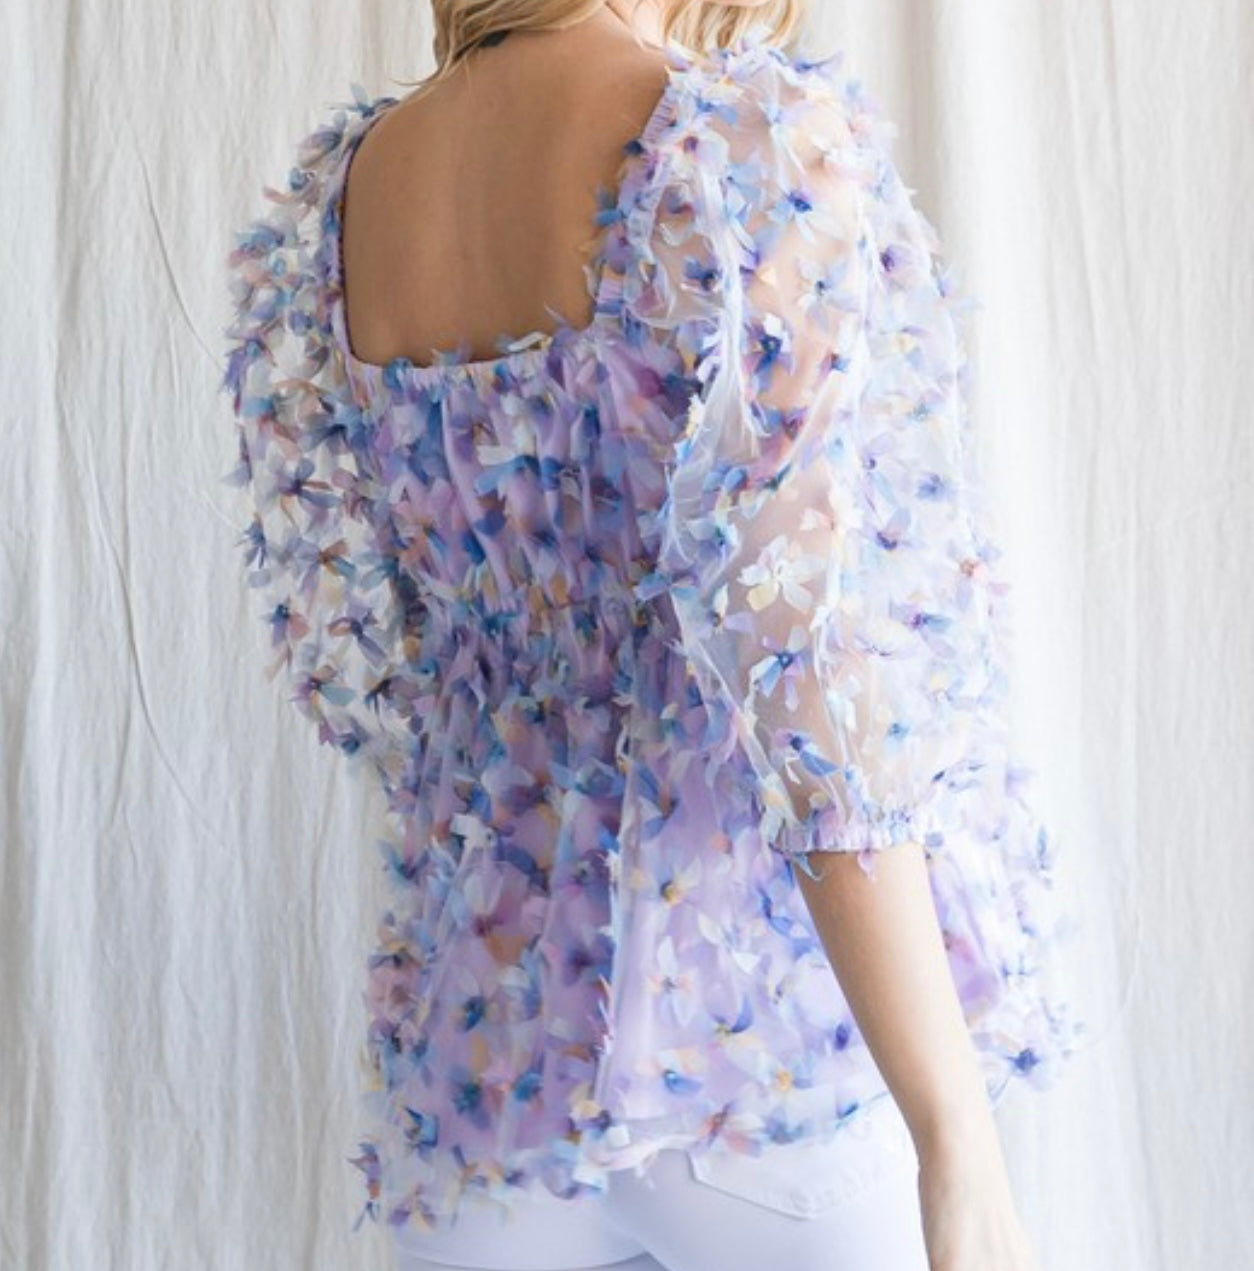 Lavender Textured Flower Baby Doll Top